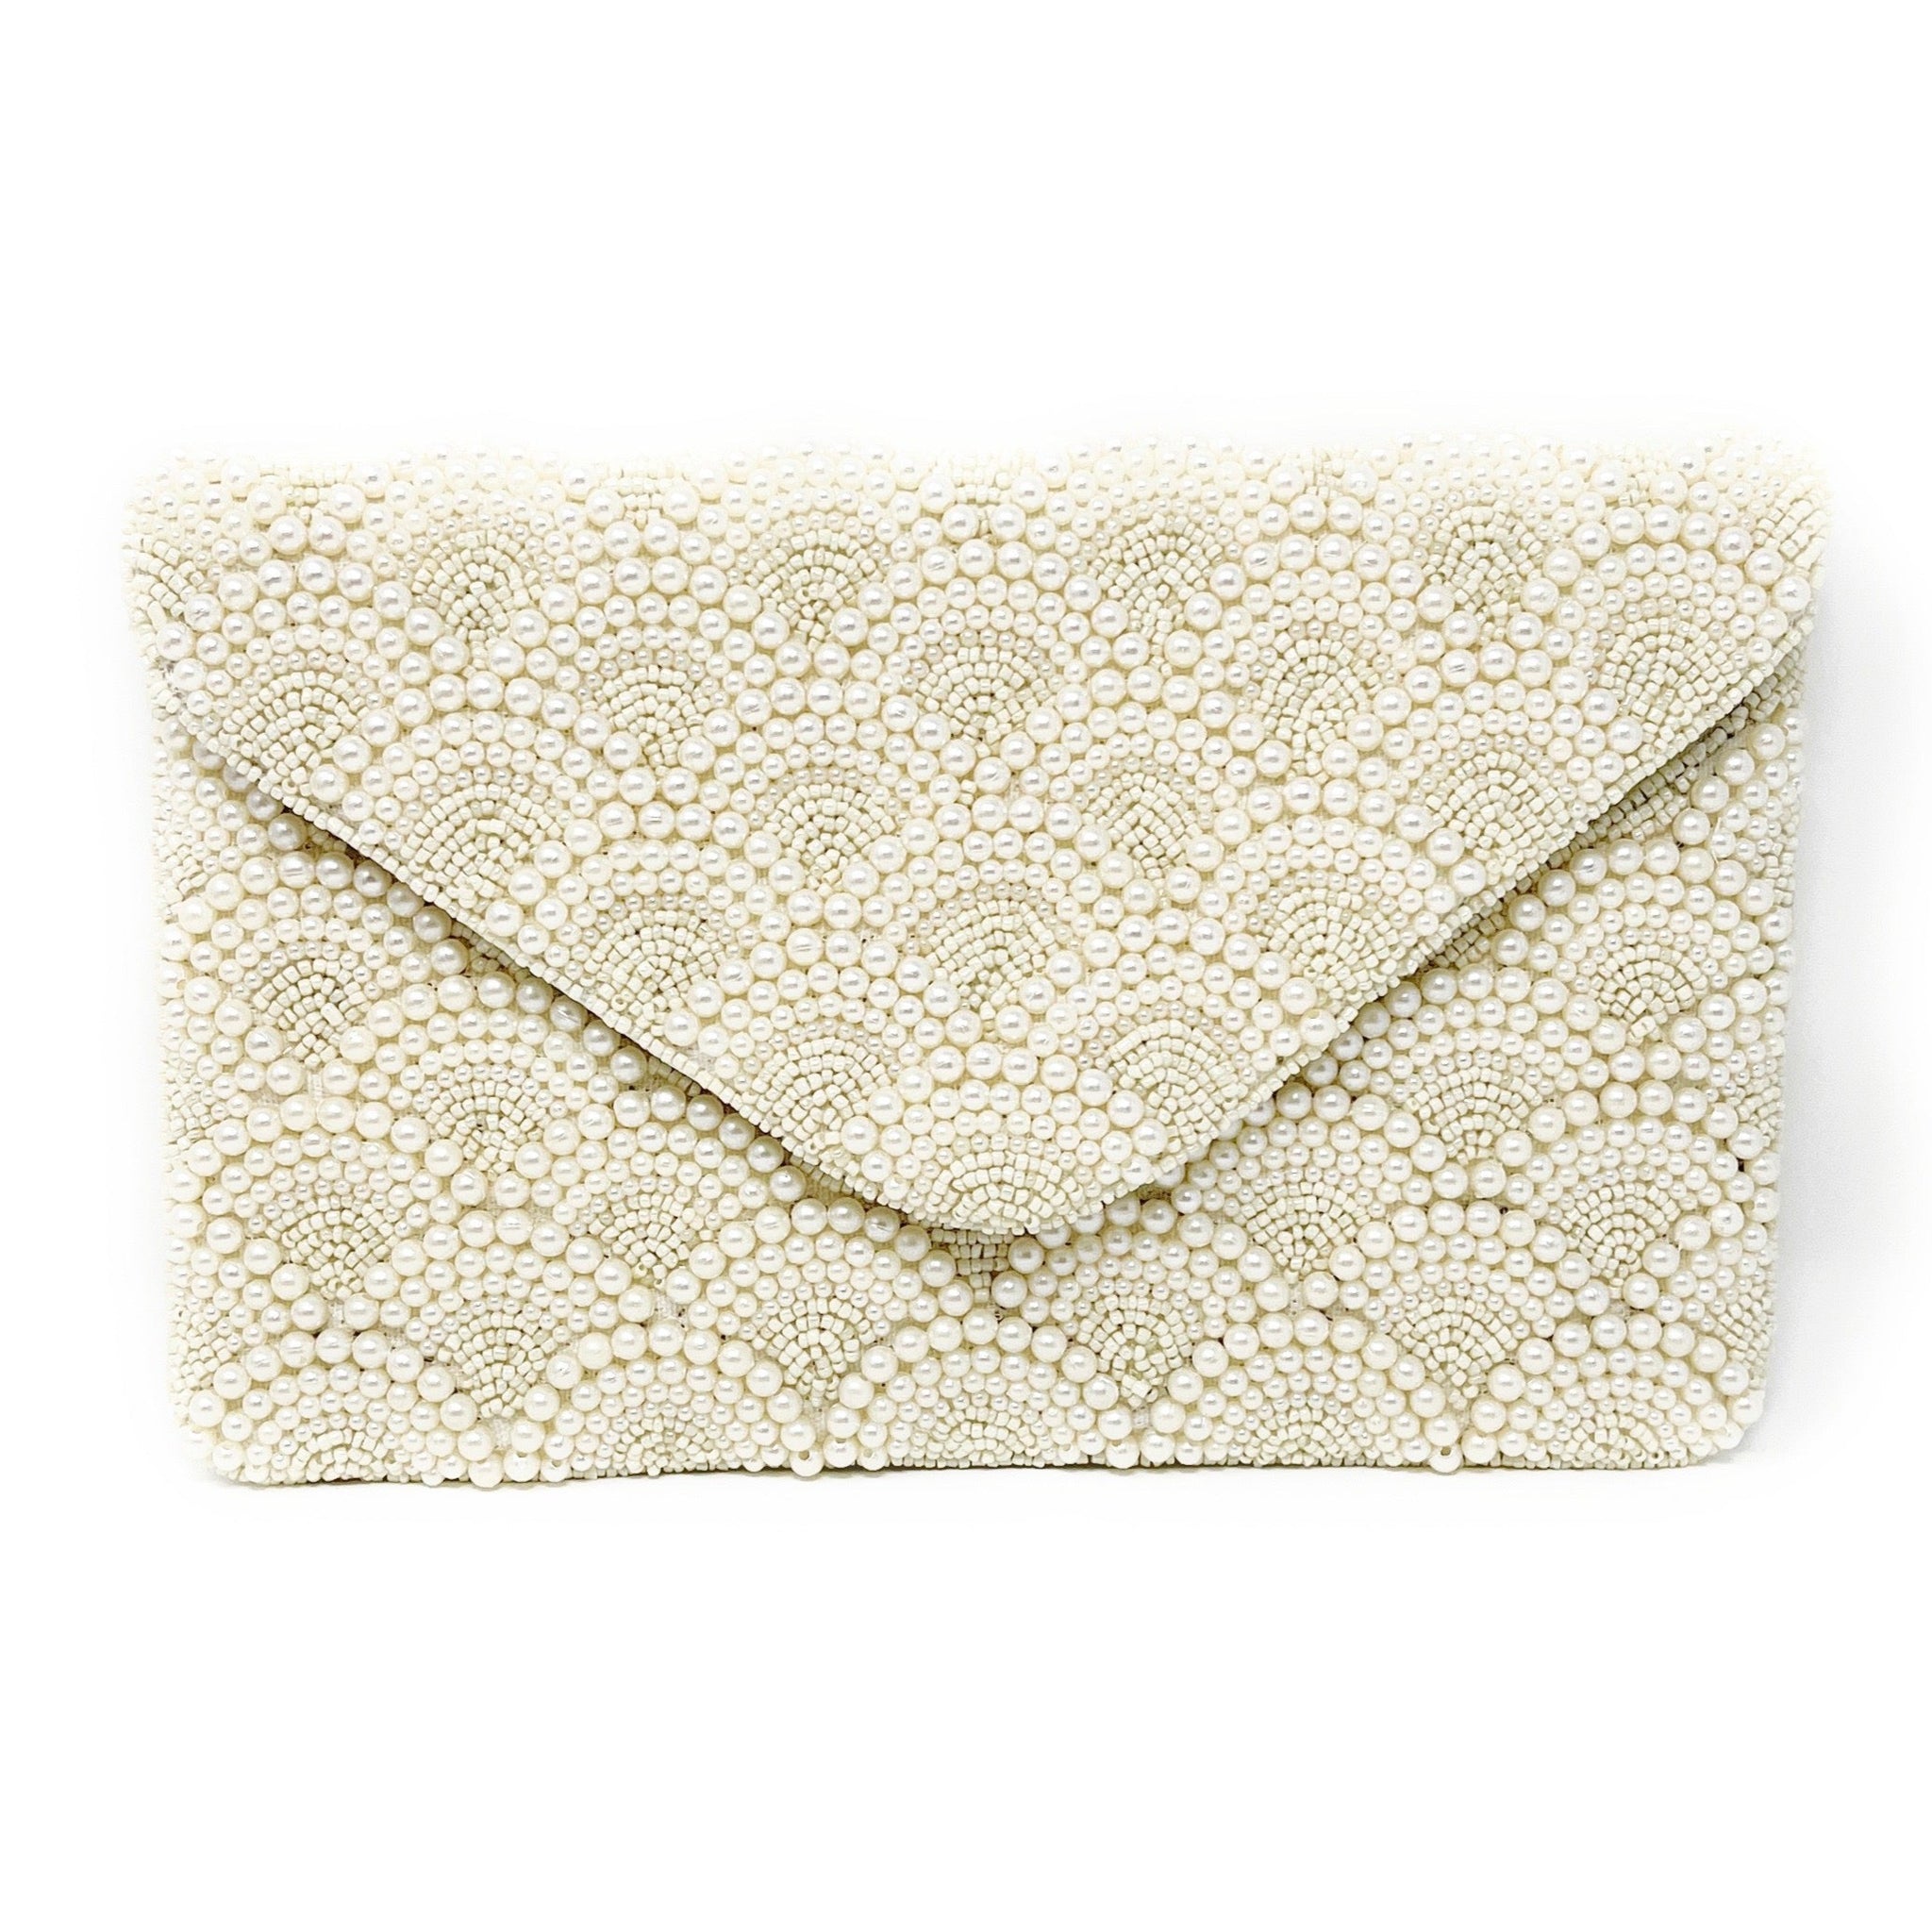 Satin Bridal Wedding Small Money Bag with Pearl-Embellished Floral Lace for  Dollar Dance, Bridal Purse, and Other Special Occasions #E1DEDBiv (IVORY) :  Amazon.co.uk: Fashion